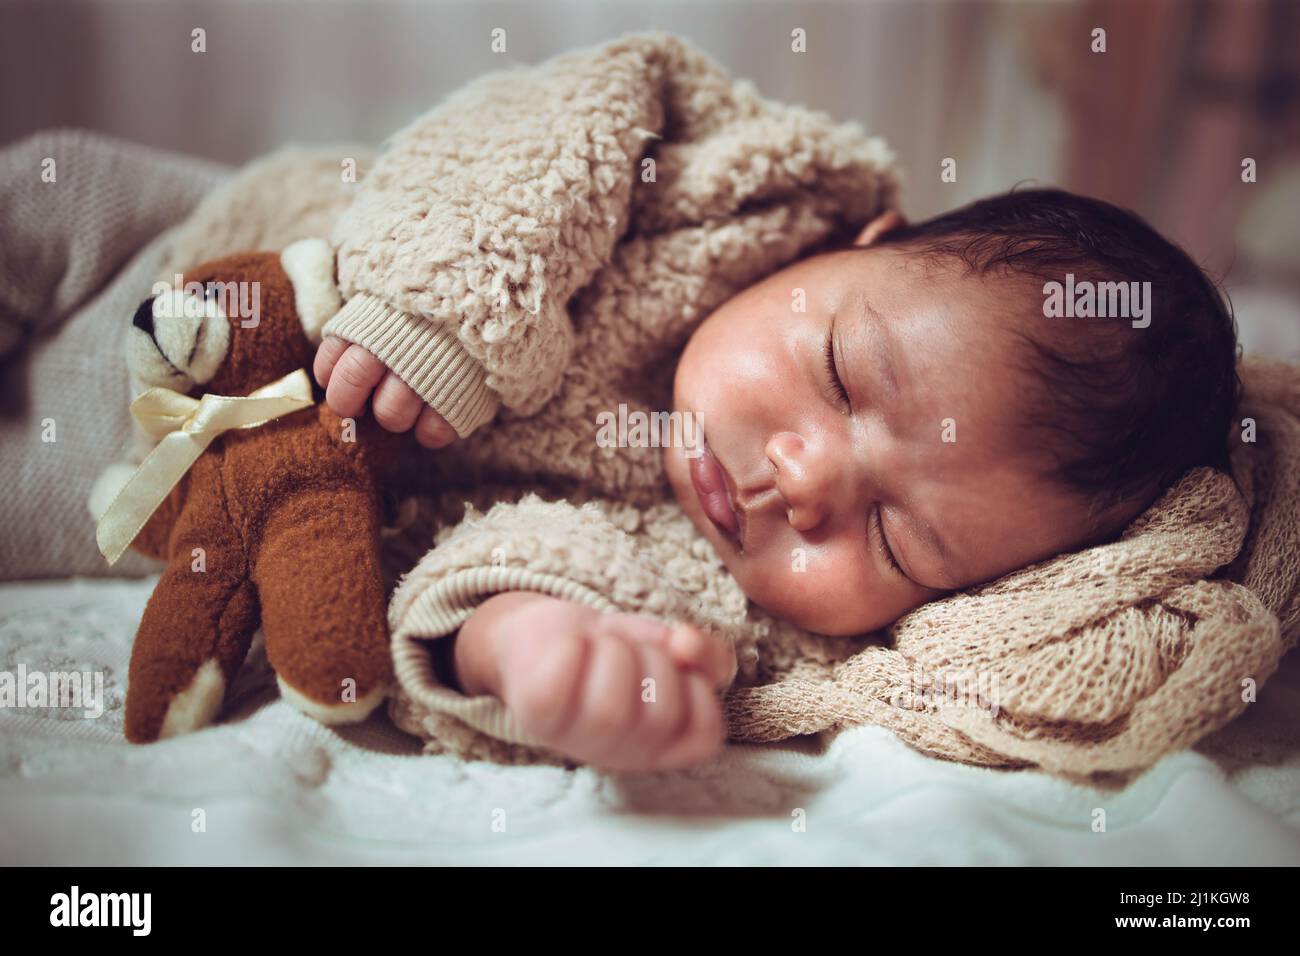 Infant multiethnic baby boy sleeping on a bed. Looking cozy with teddy bear Stock Photo